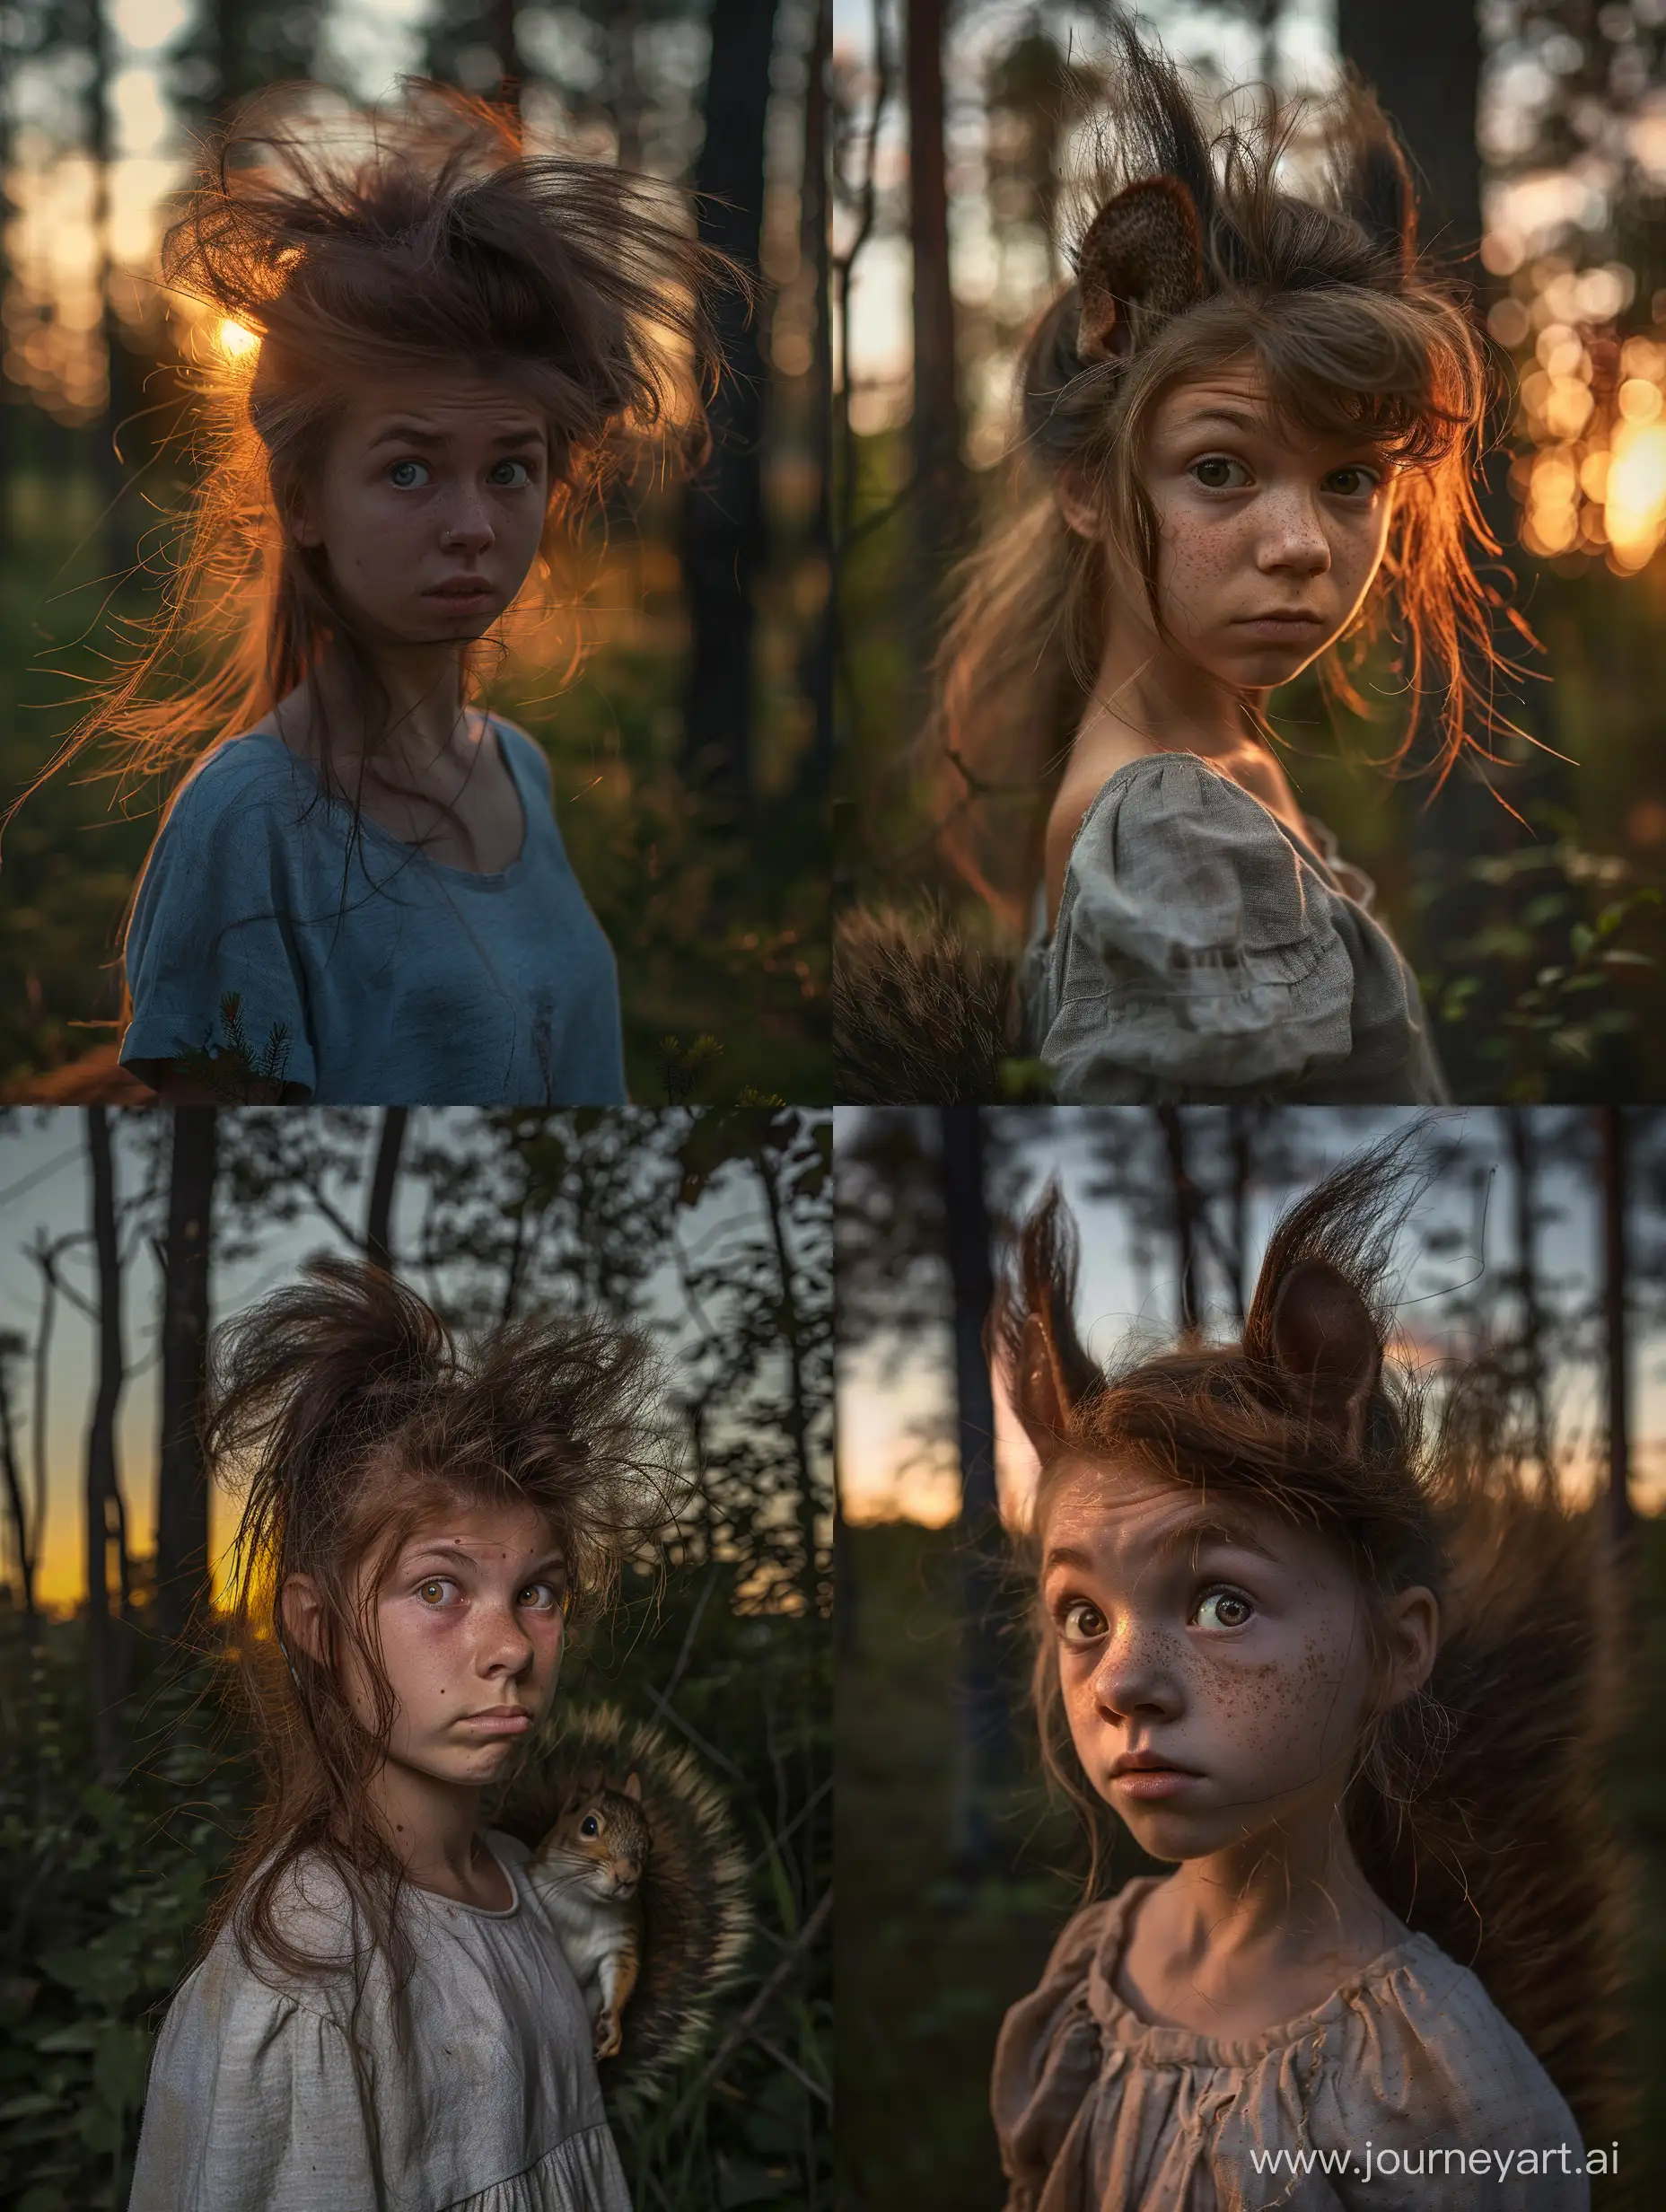 Young-Woman-Transformed-into-Squirrel-at-Sunset-in-Forest